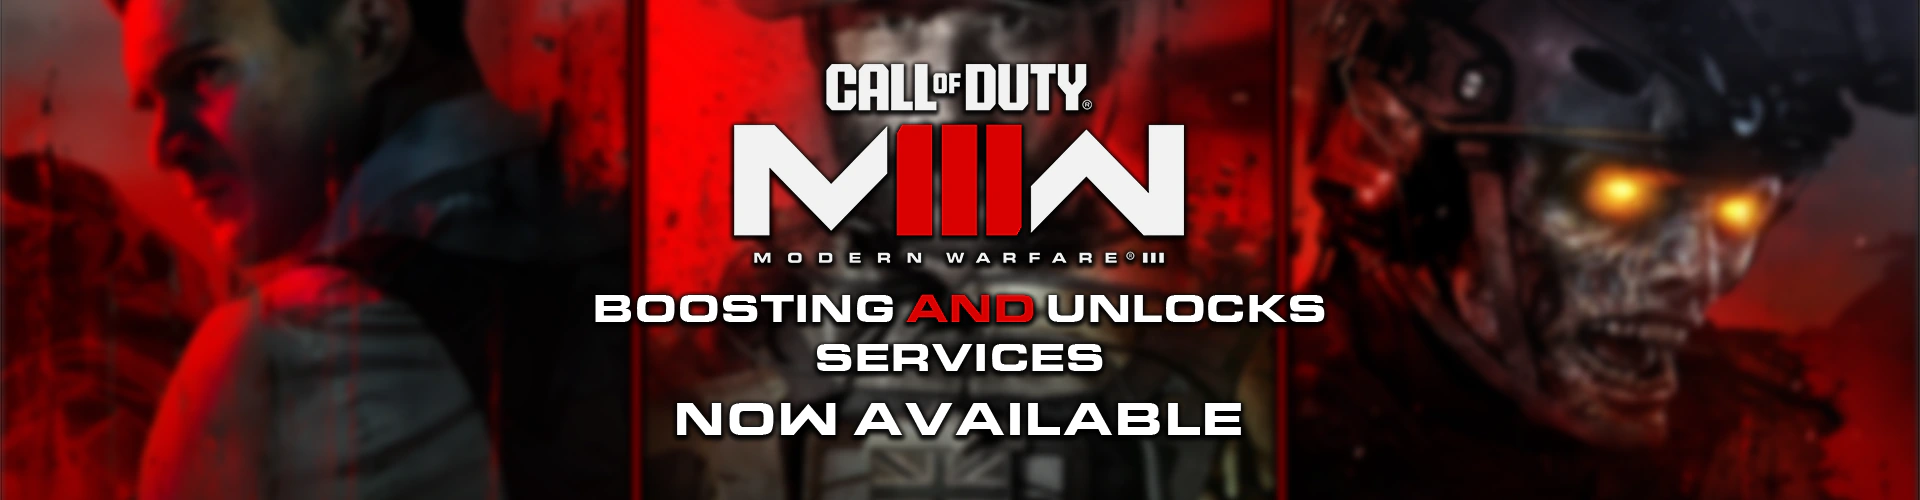 Call of Duty Mordern Ware 3 Unlock Services